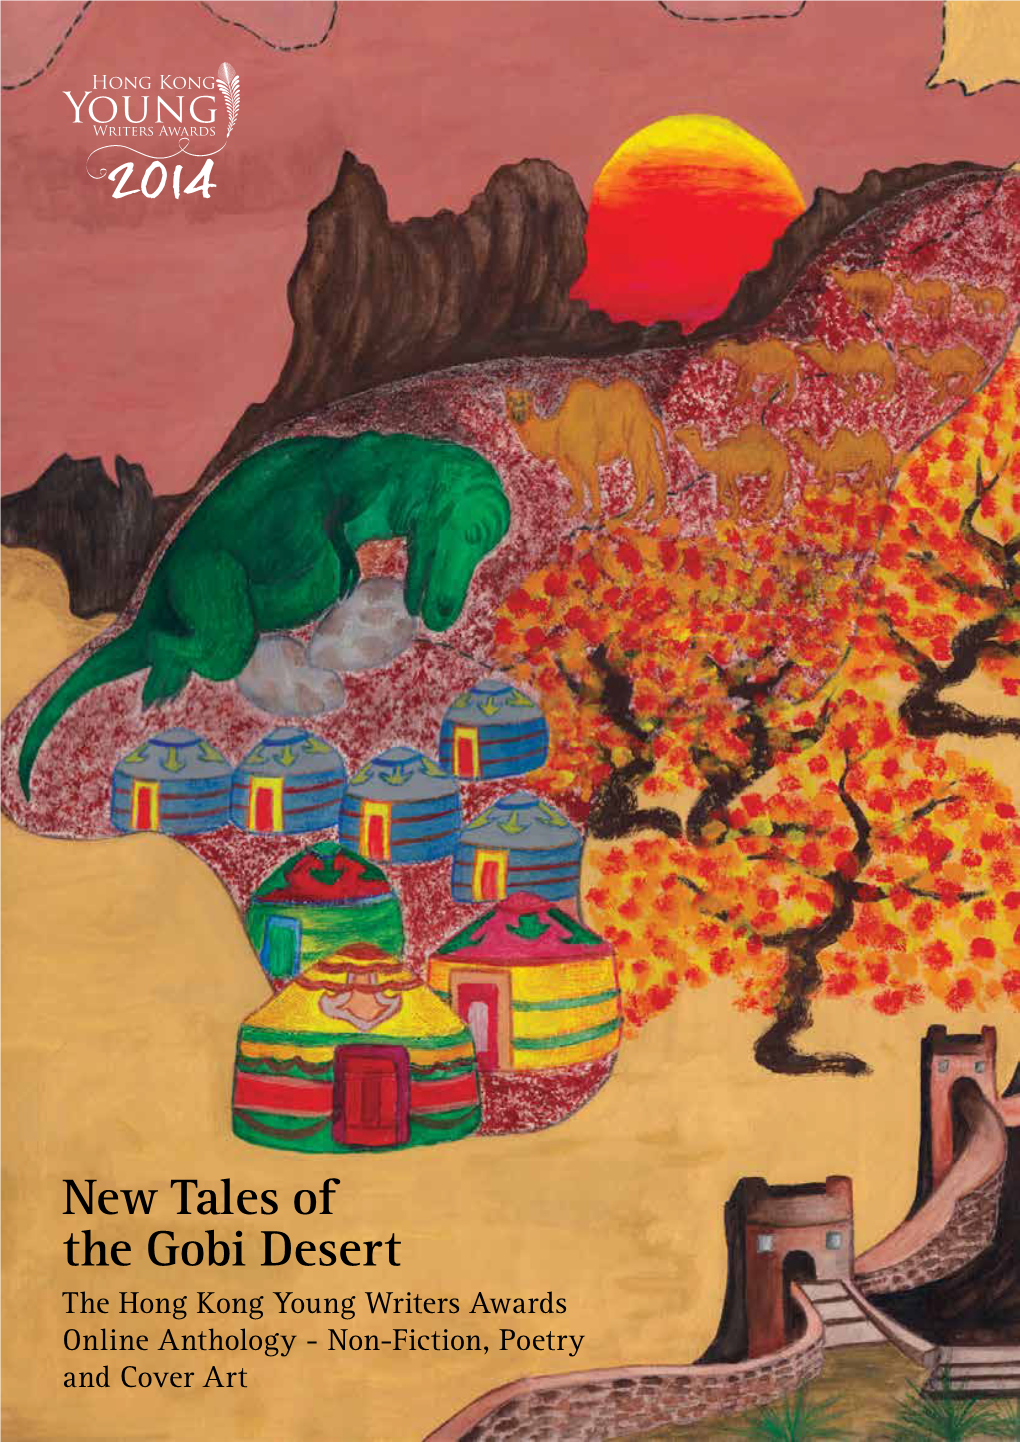 New Tales of the Gobi Desert the Hong Kong Young Writers Awards Online Anthology - Non-Fiction, Poetry and Cover Art Sponsors